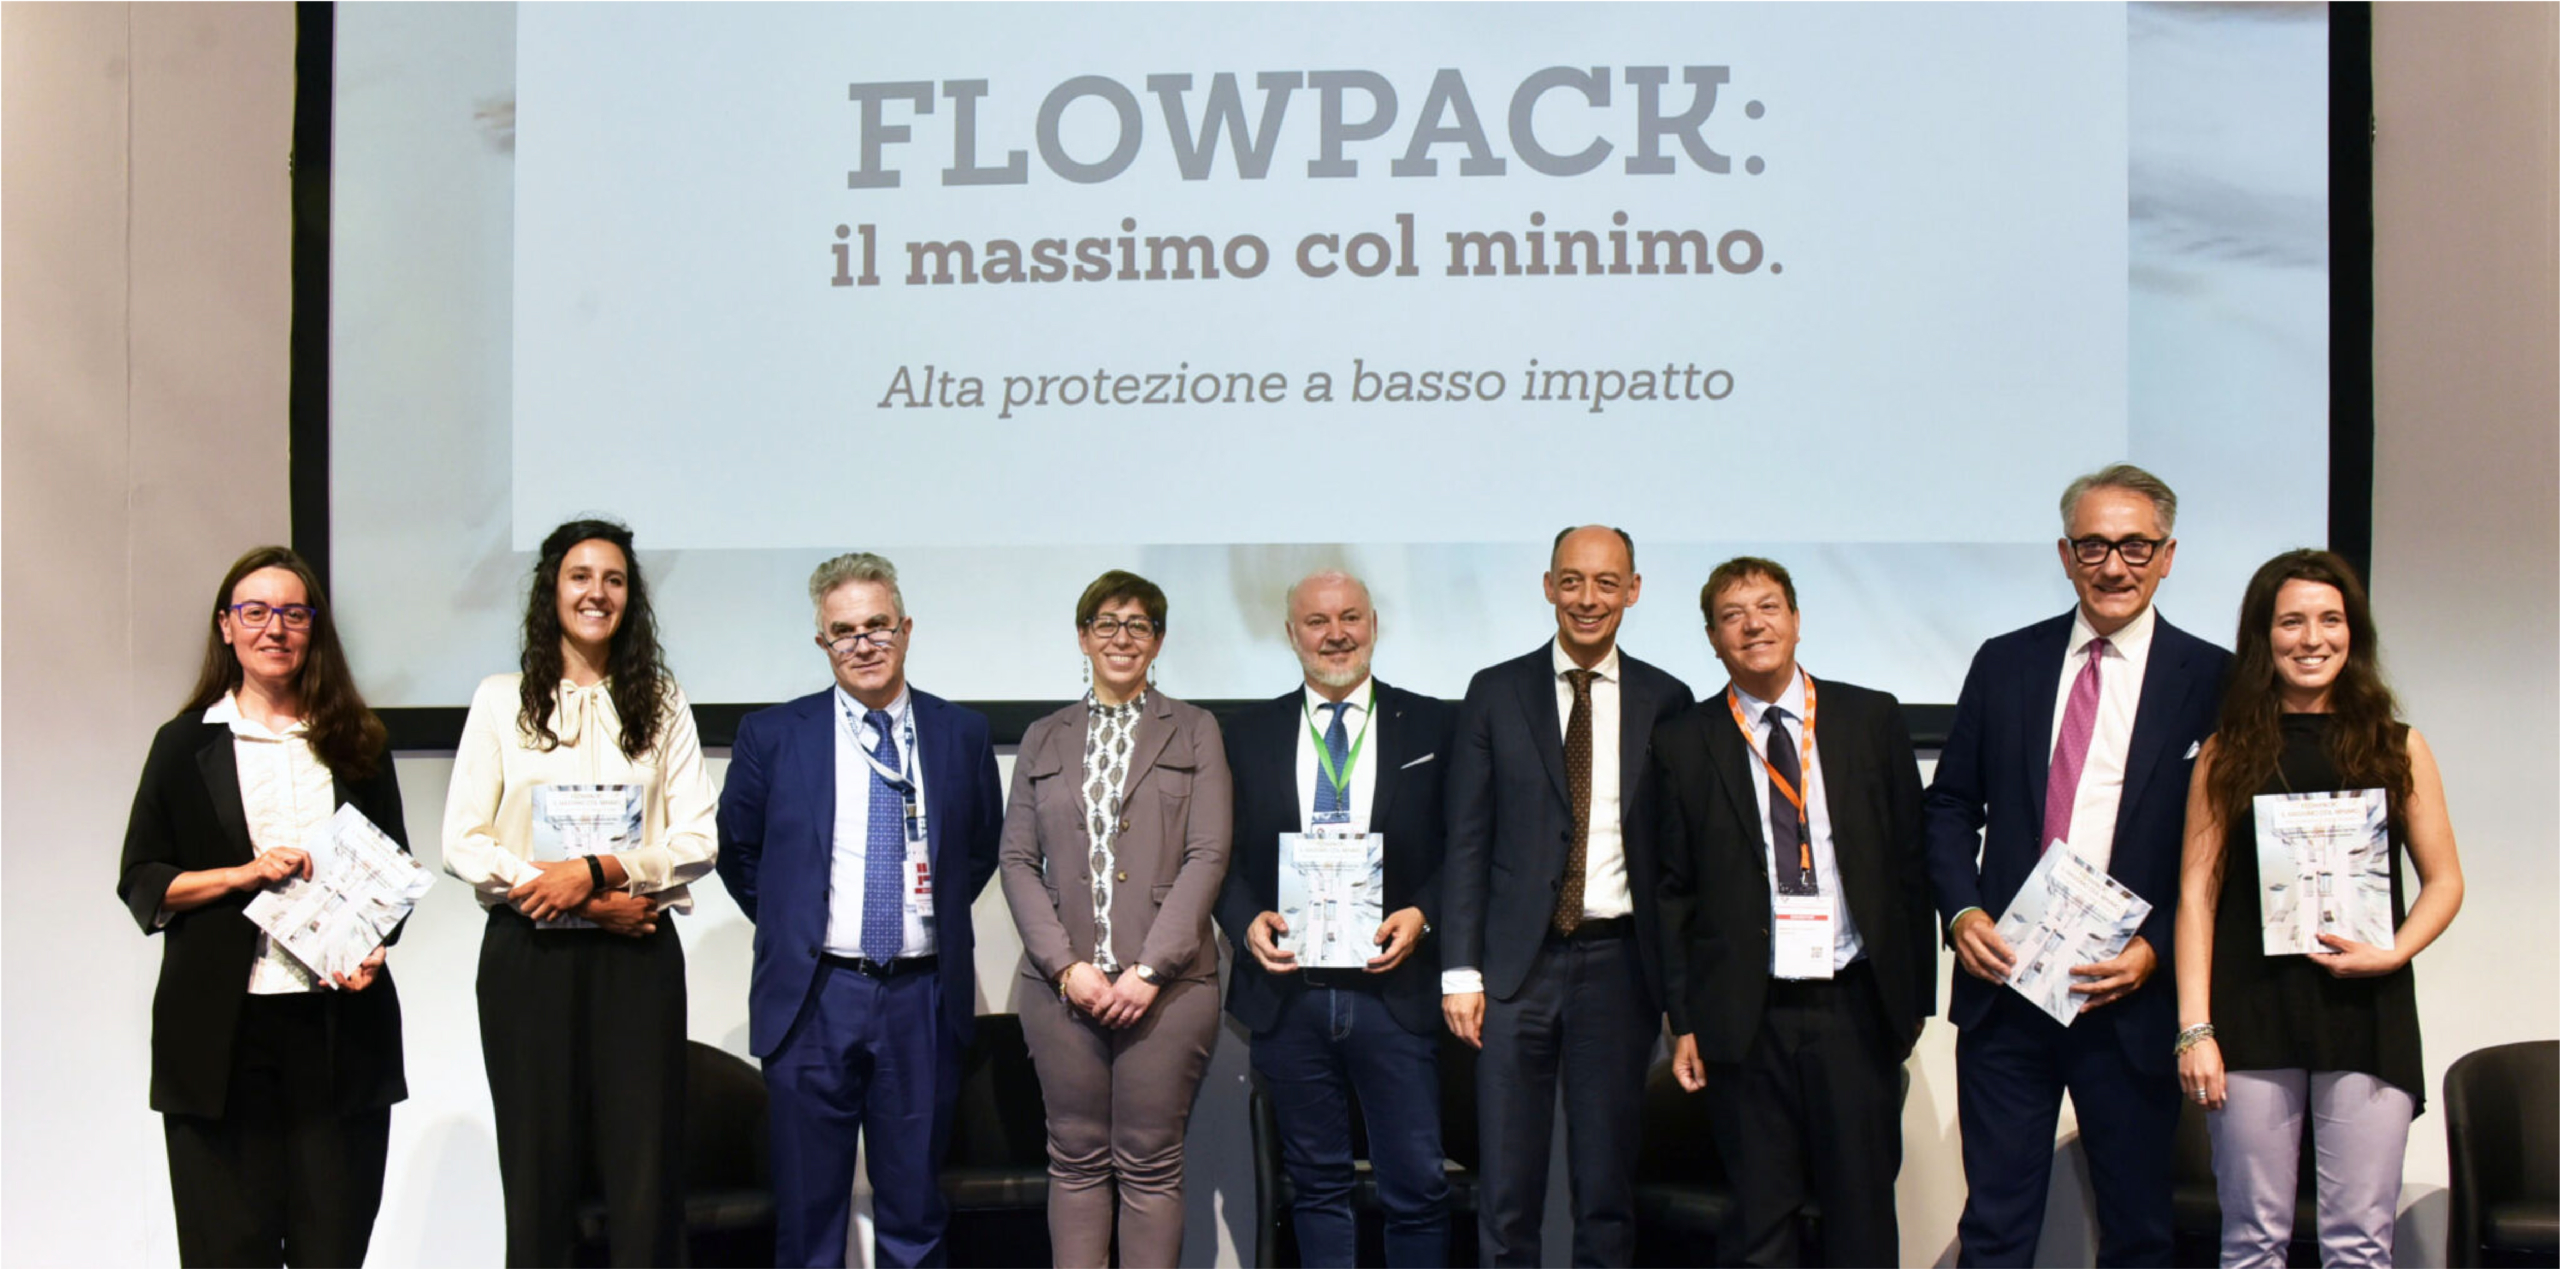 Flowpack with Mario Molinaro and other Industry experts